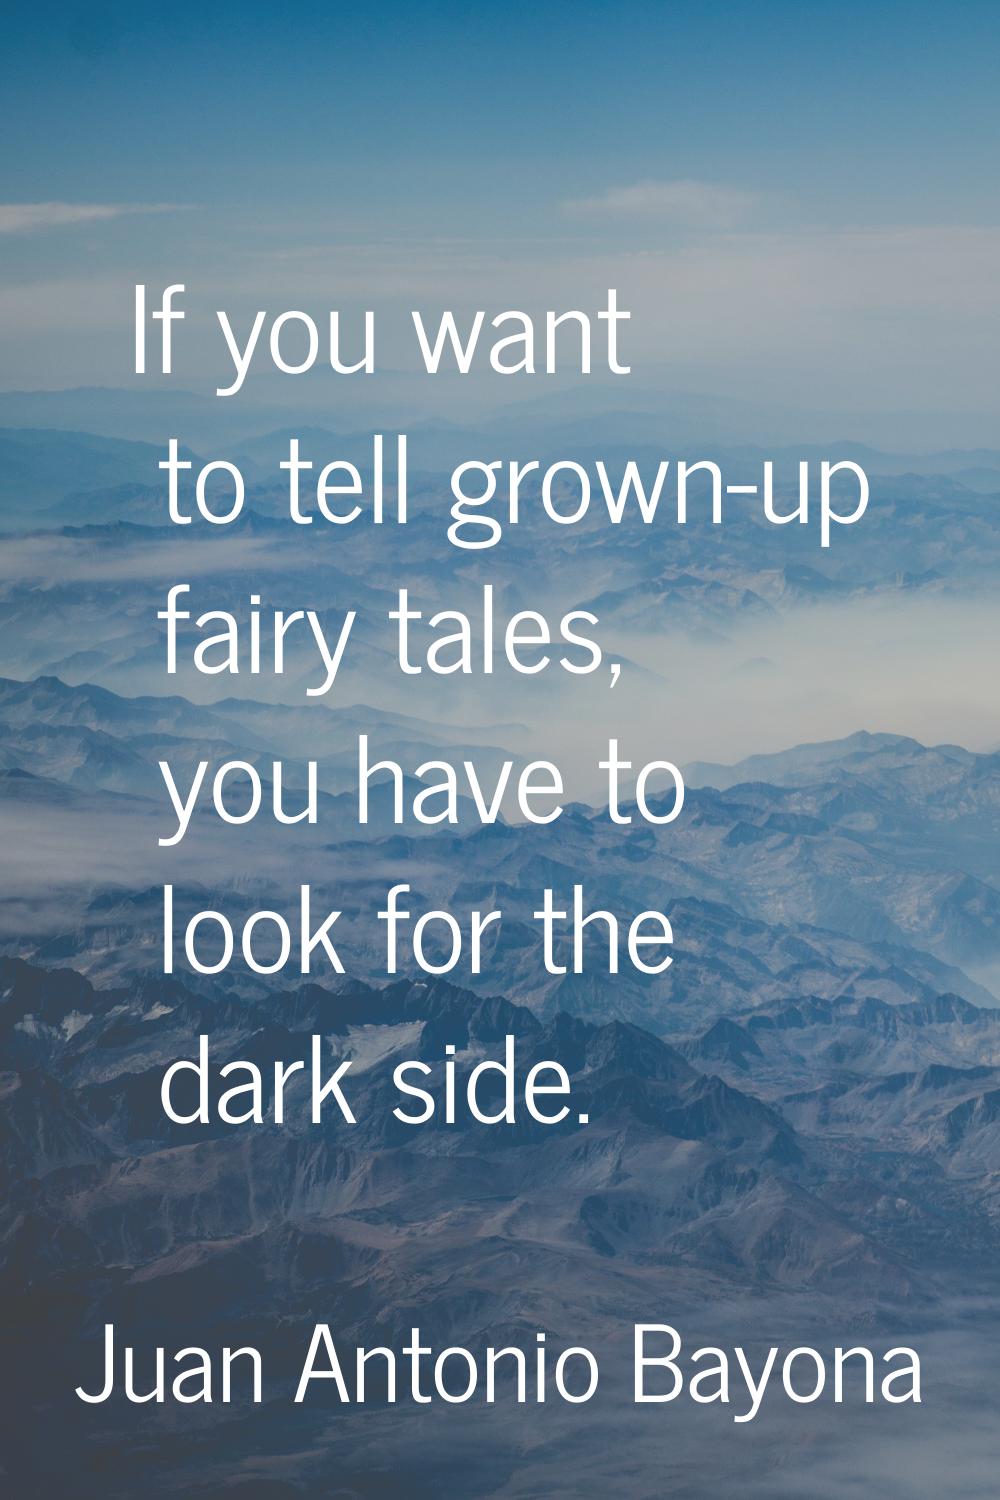 If you want to tell grown-up fairy tales, you have to look for the dark side.